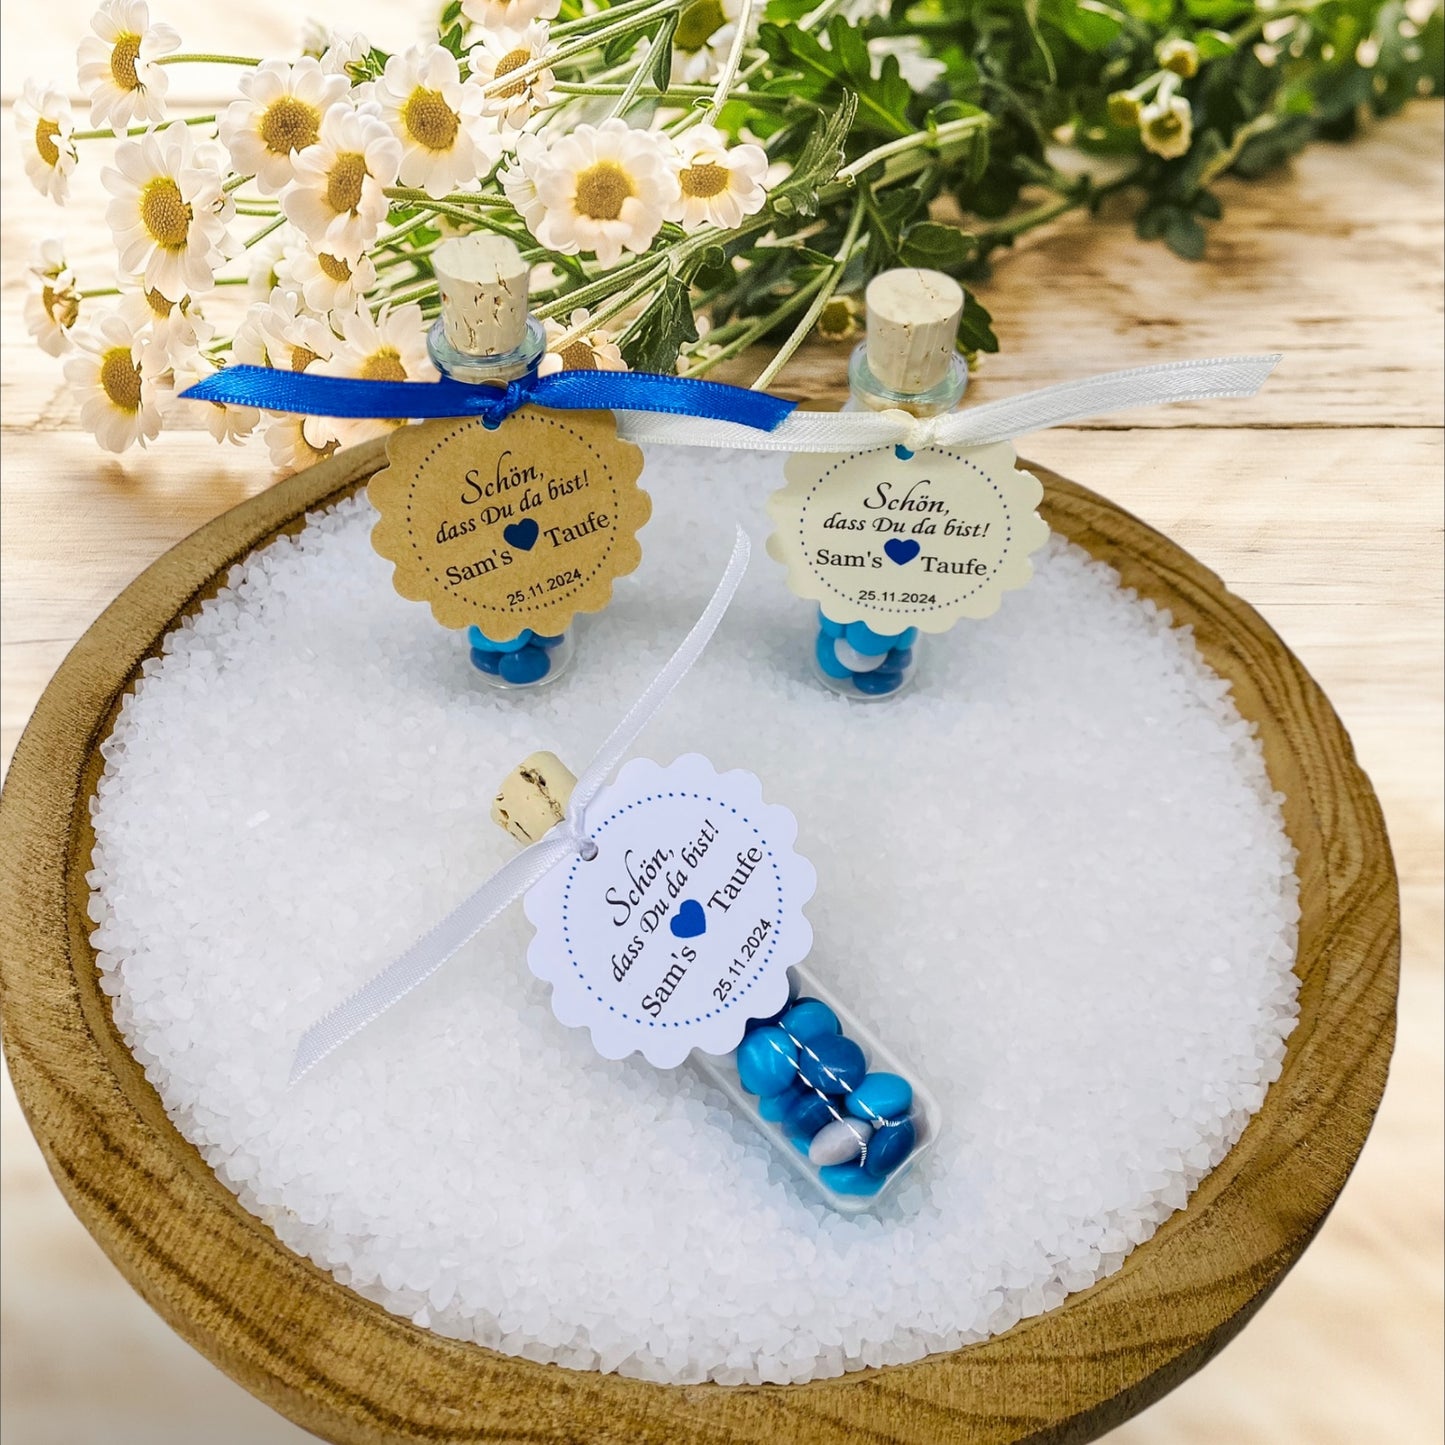 Delicate love in every detail: Personalized guest gift for boys in a ship's glass for unforgettable christening moments 